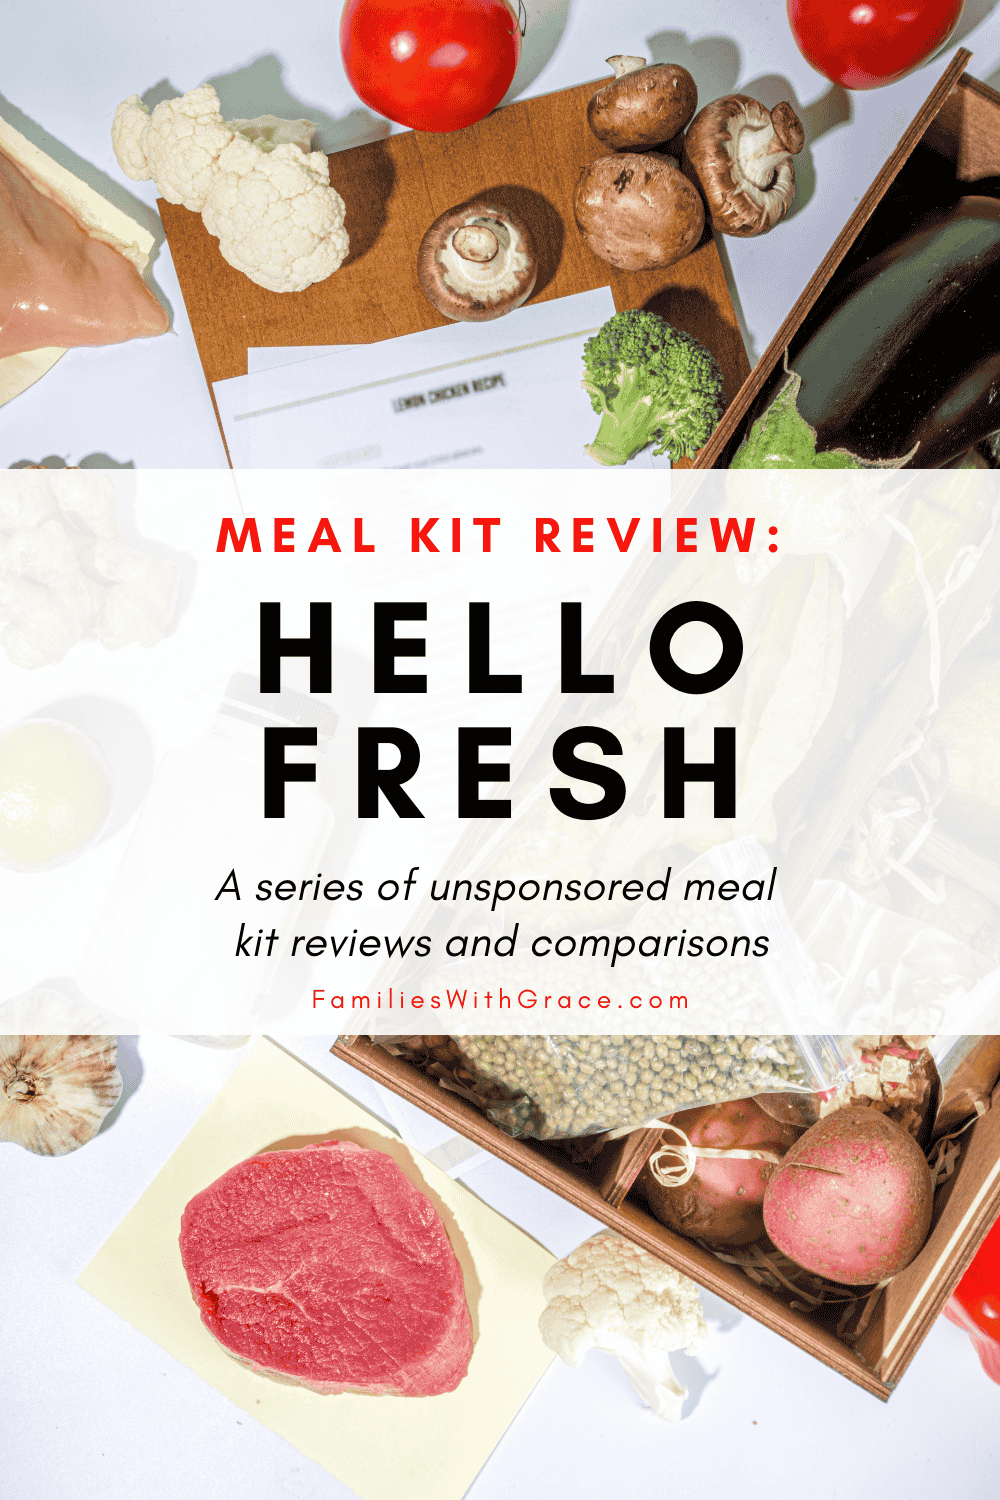 Meal kit review: Hello Fresh